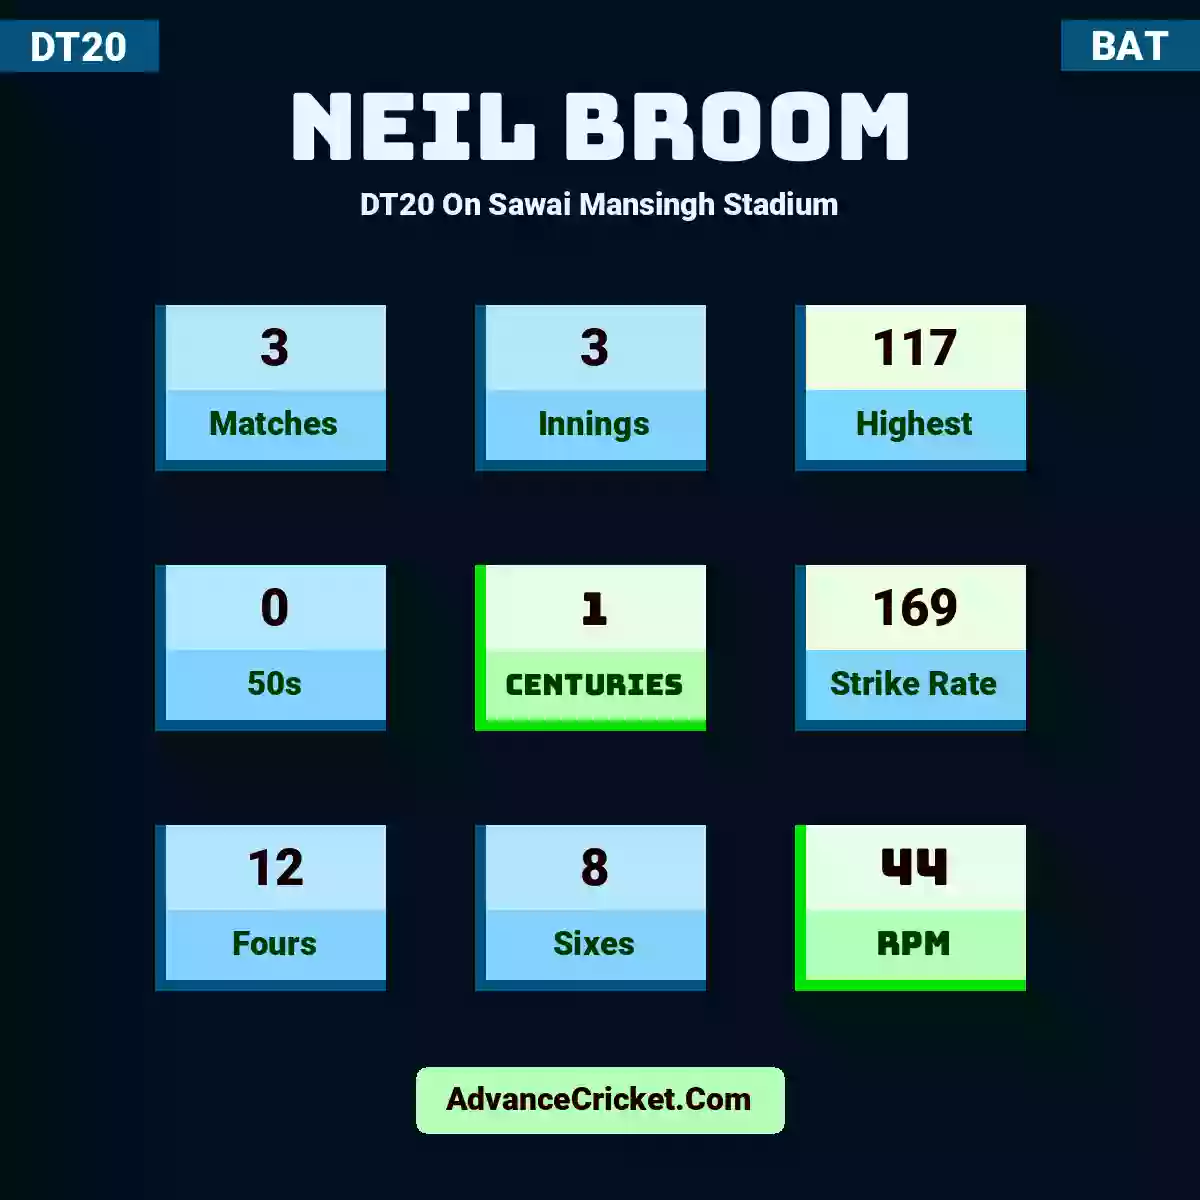 Neil Broom DT20  On Sawai Mansingh Stadium, Neil Broom played 3 matches, scored 117 runs as highest, 0 half-centuries, and 1 centuries, with a strike rate of 169. N.Broom hit 12 fours and 8 sixes, with an RPM of 44.